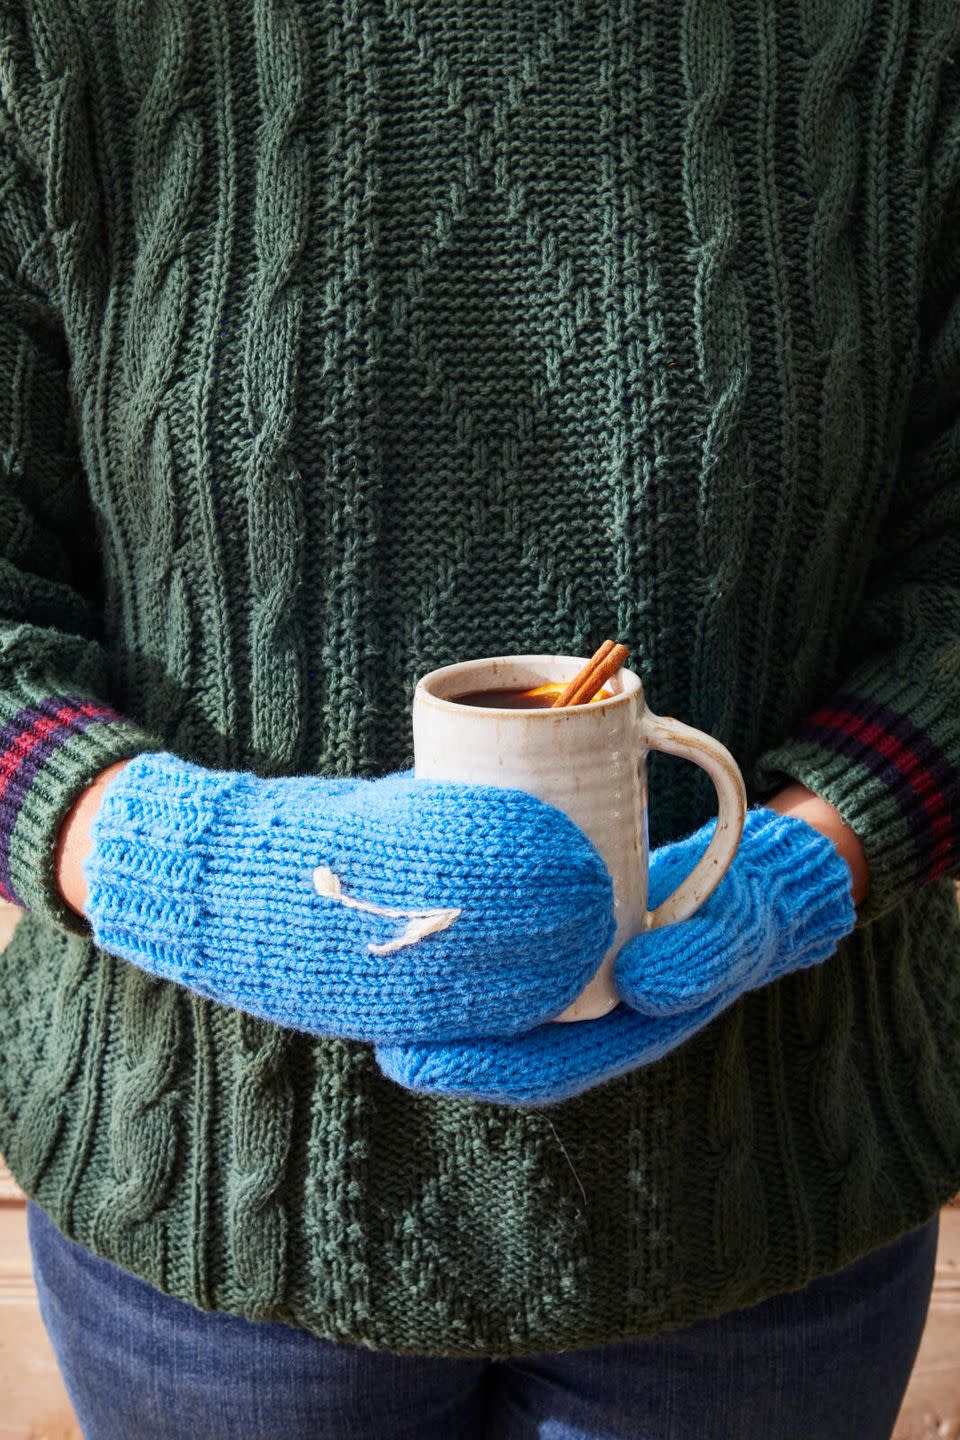 mugs a person holding a cup wearing blue mittens with a musical note stitched on them